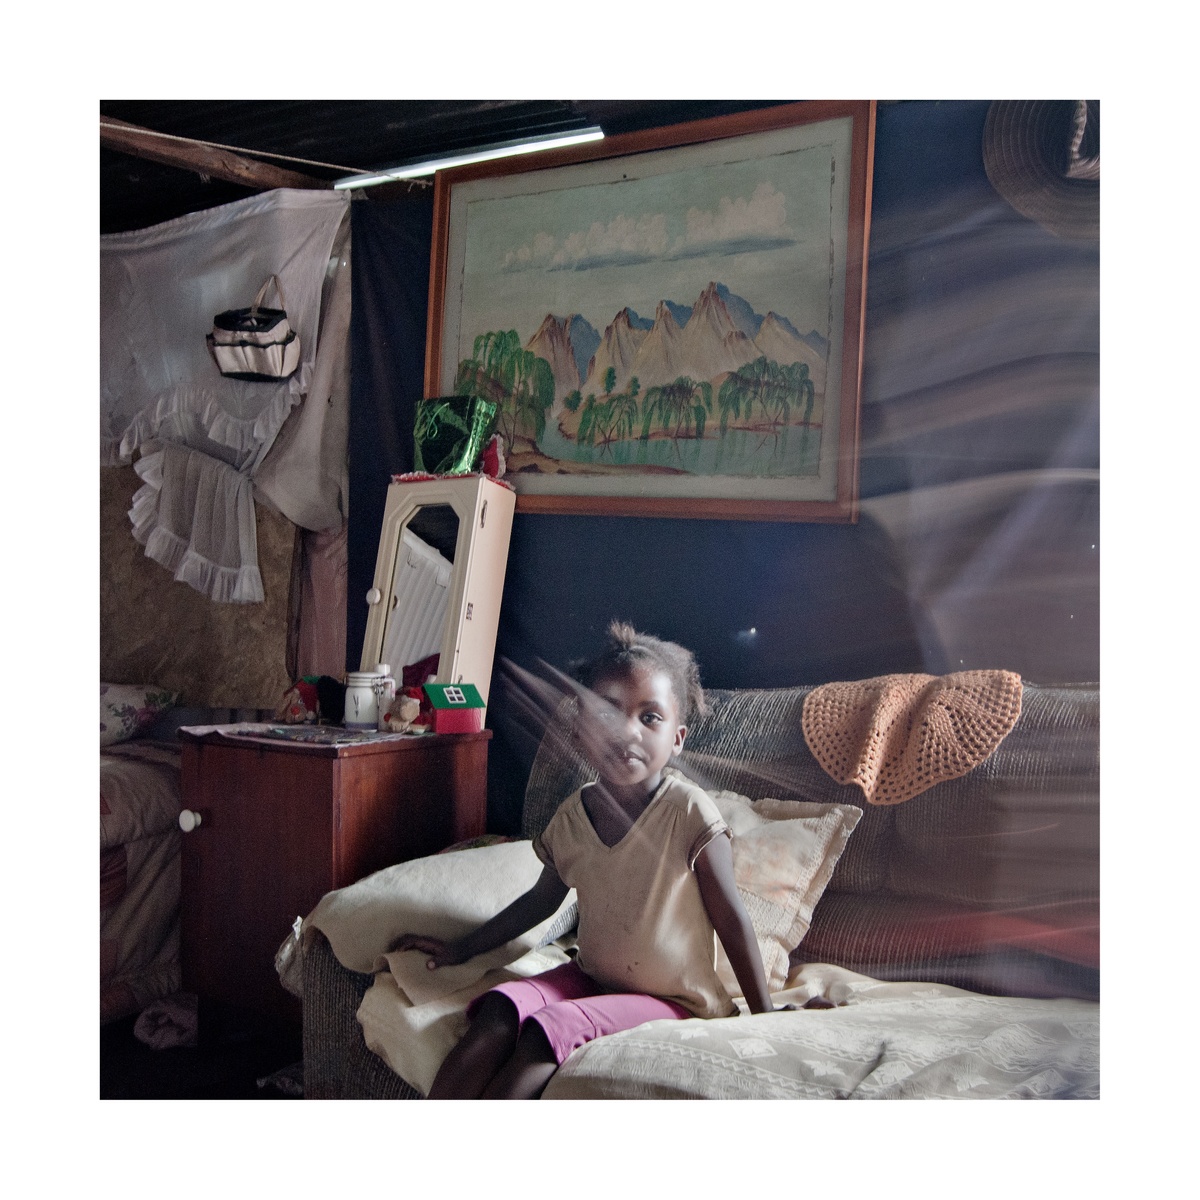 Photograph from Jabulani Dhlamini’s residency on A4’s top floor shows a child sitting on a couch.
